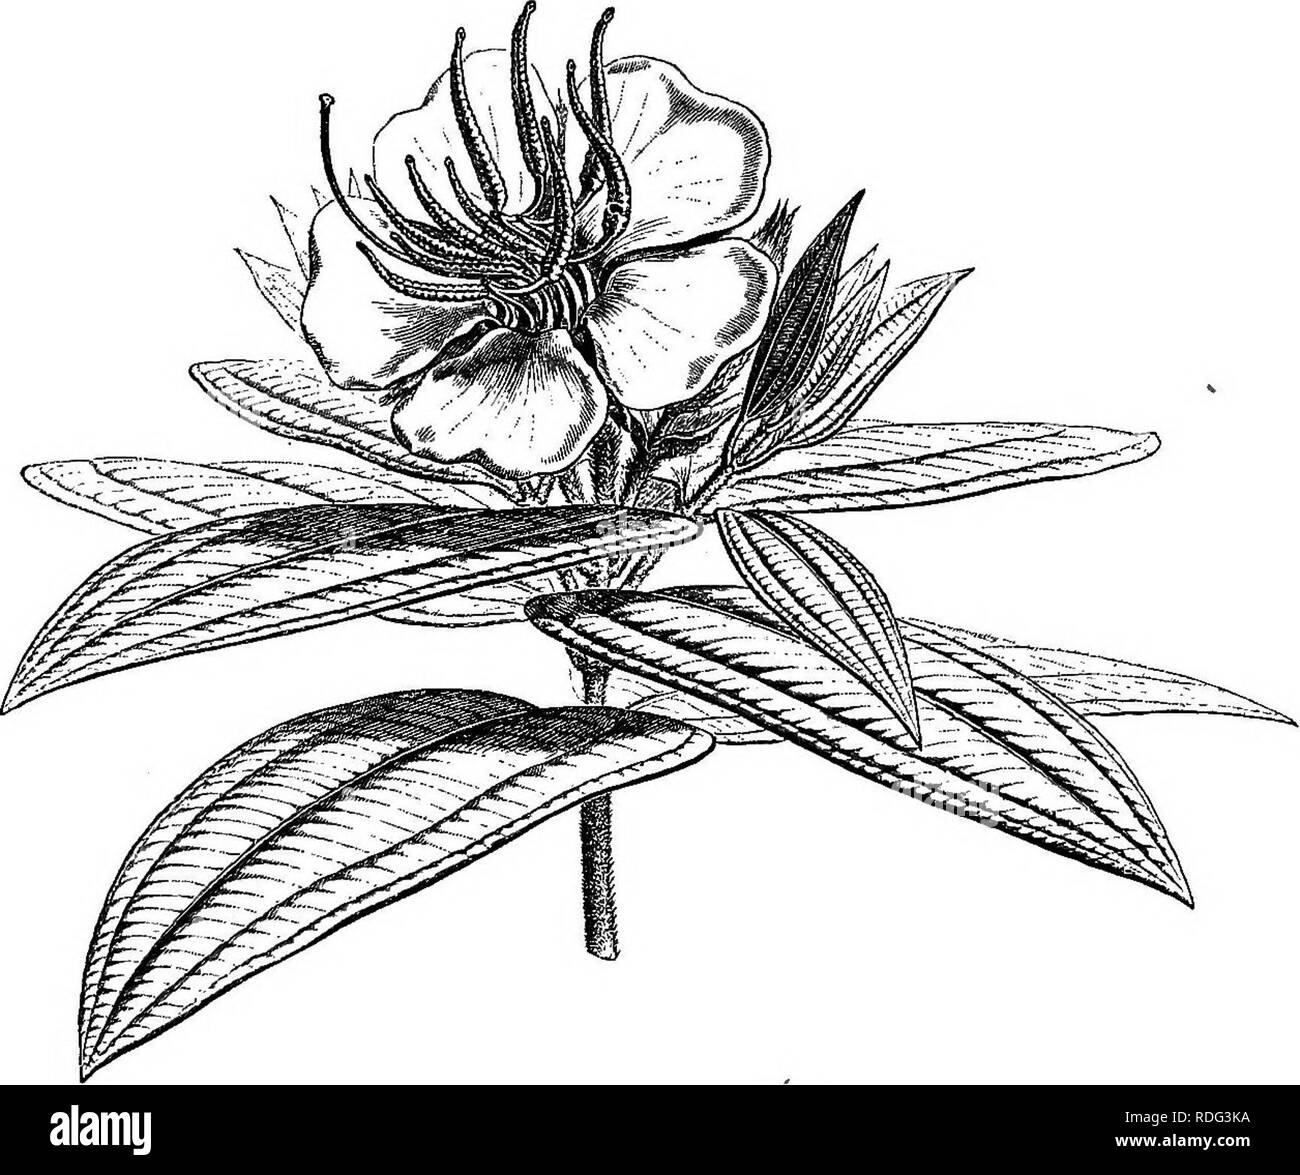 . The natural history of plants. Botany. LX. MELASTOMACE^. I. MELASTOMA SERIES. Melastoma (fig. 1-7)' has hermaphrodite and regular flowers, the receptacle having the form of a sac with a large superior opening. Melastoma mafalicithi icum.. Fig. 1. Floriferoua branch. Near the margin of the orifice are inserted externally the sepals generally five in number, twisted' in the bud and covered externally, ' Melastoma BtiKM. Fl. Zeyh 72.—L. Gen. n. 644 (part).—J. Gen. 329 (part).—Don. Mem. Wern. Soe. iv. 286 (part).—DO. Frodr. iii. 144. —Spach, Suit. A Buffon, iv. 249.—Endl. Gen. n. 6219.—Naud. Atm Stock Photo